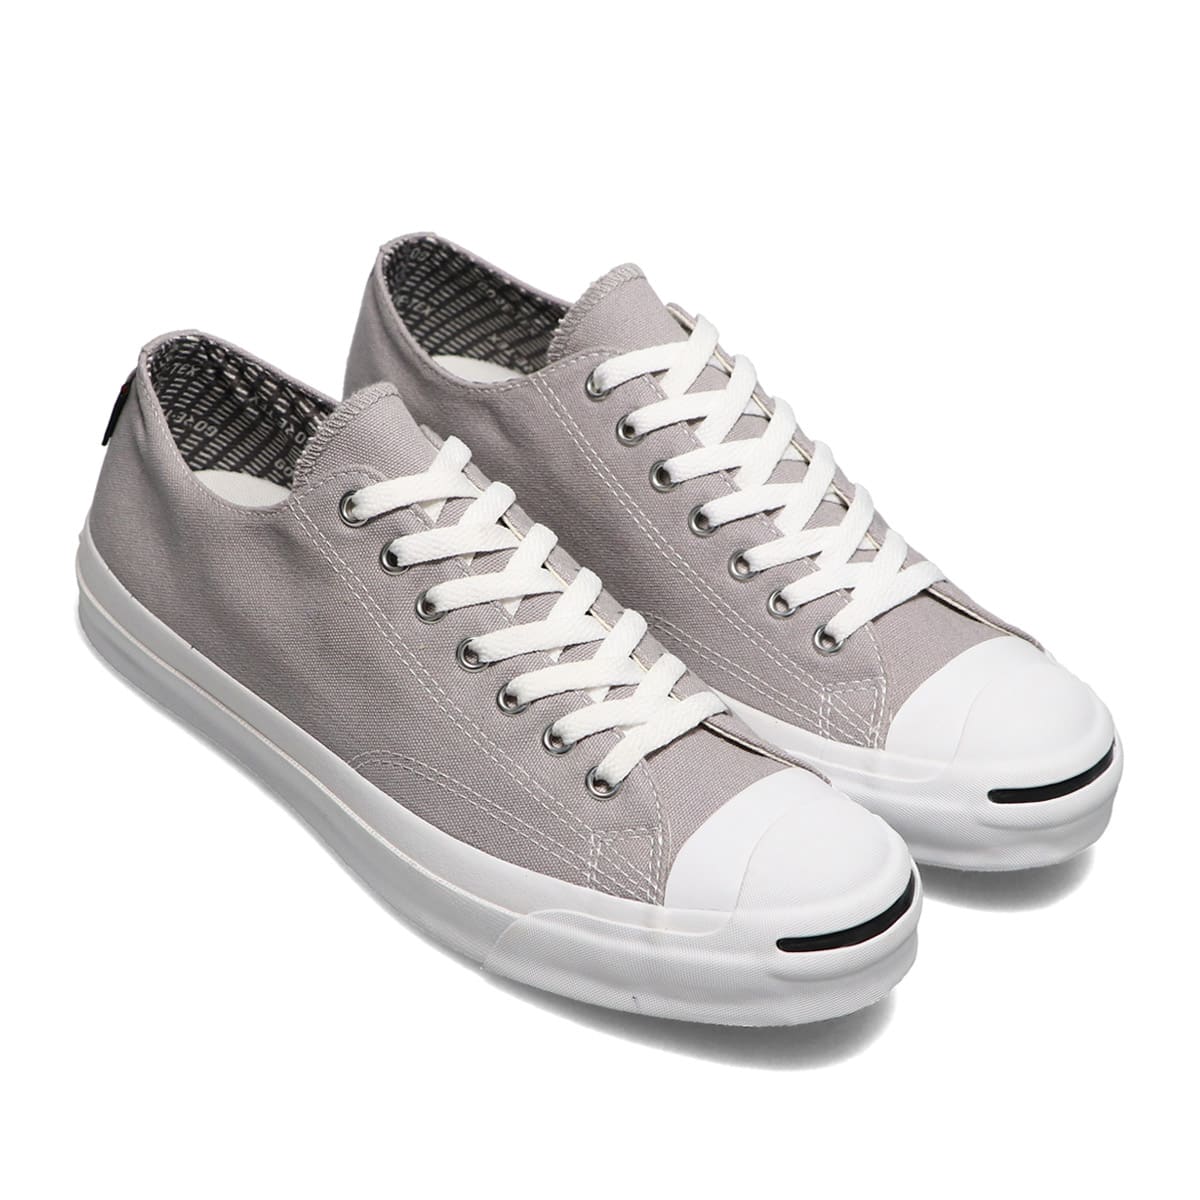 CONVERSE JACK PURCELL GORE-TEX RH GREY 21FW-I_photo_large